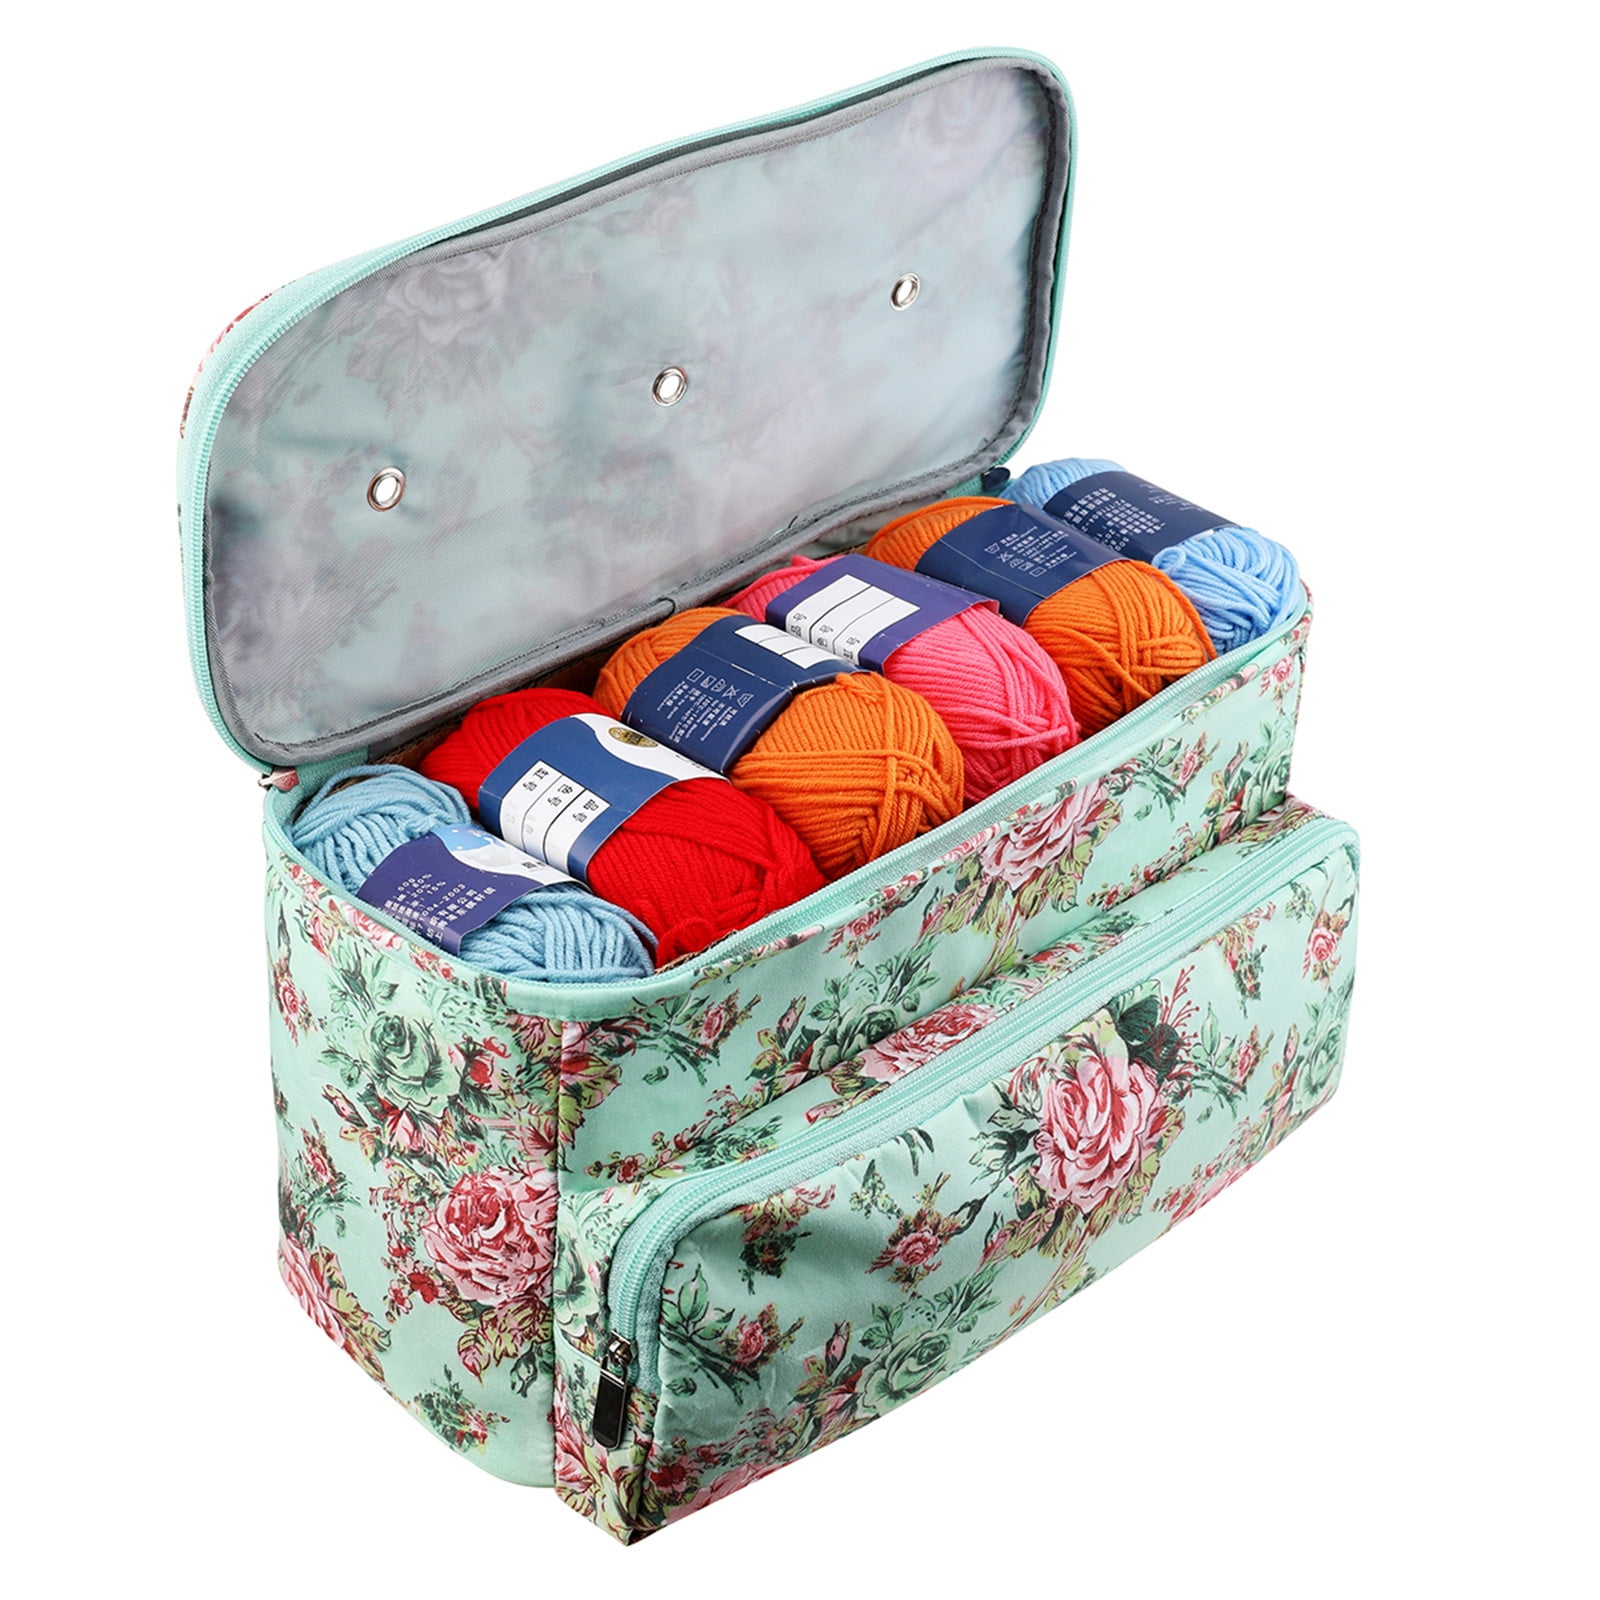 Hold N' Storage Wrapping paper storage organizer bag - Fits up to 40” gift  wrap Rolls